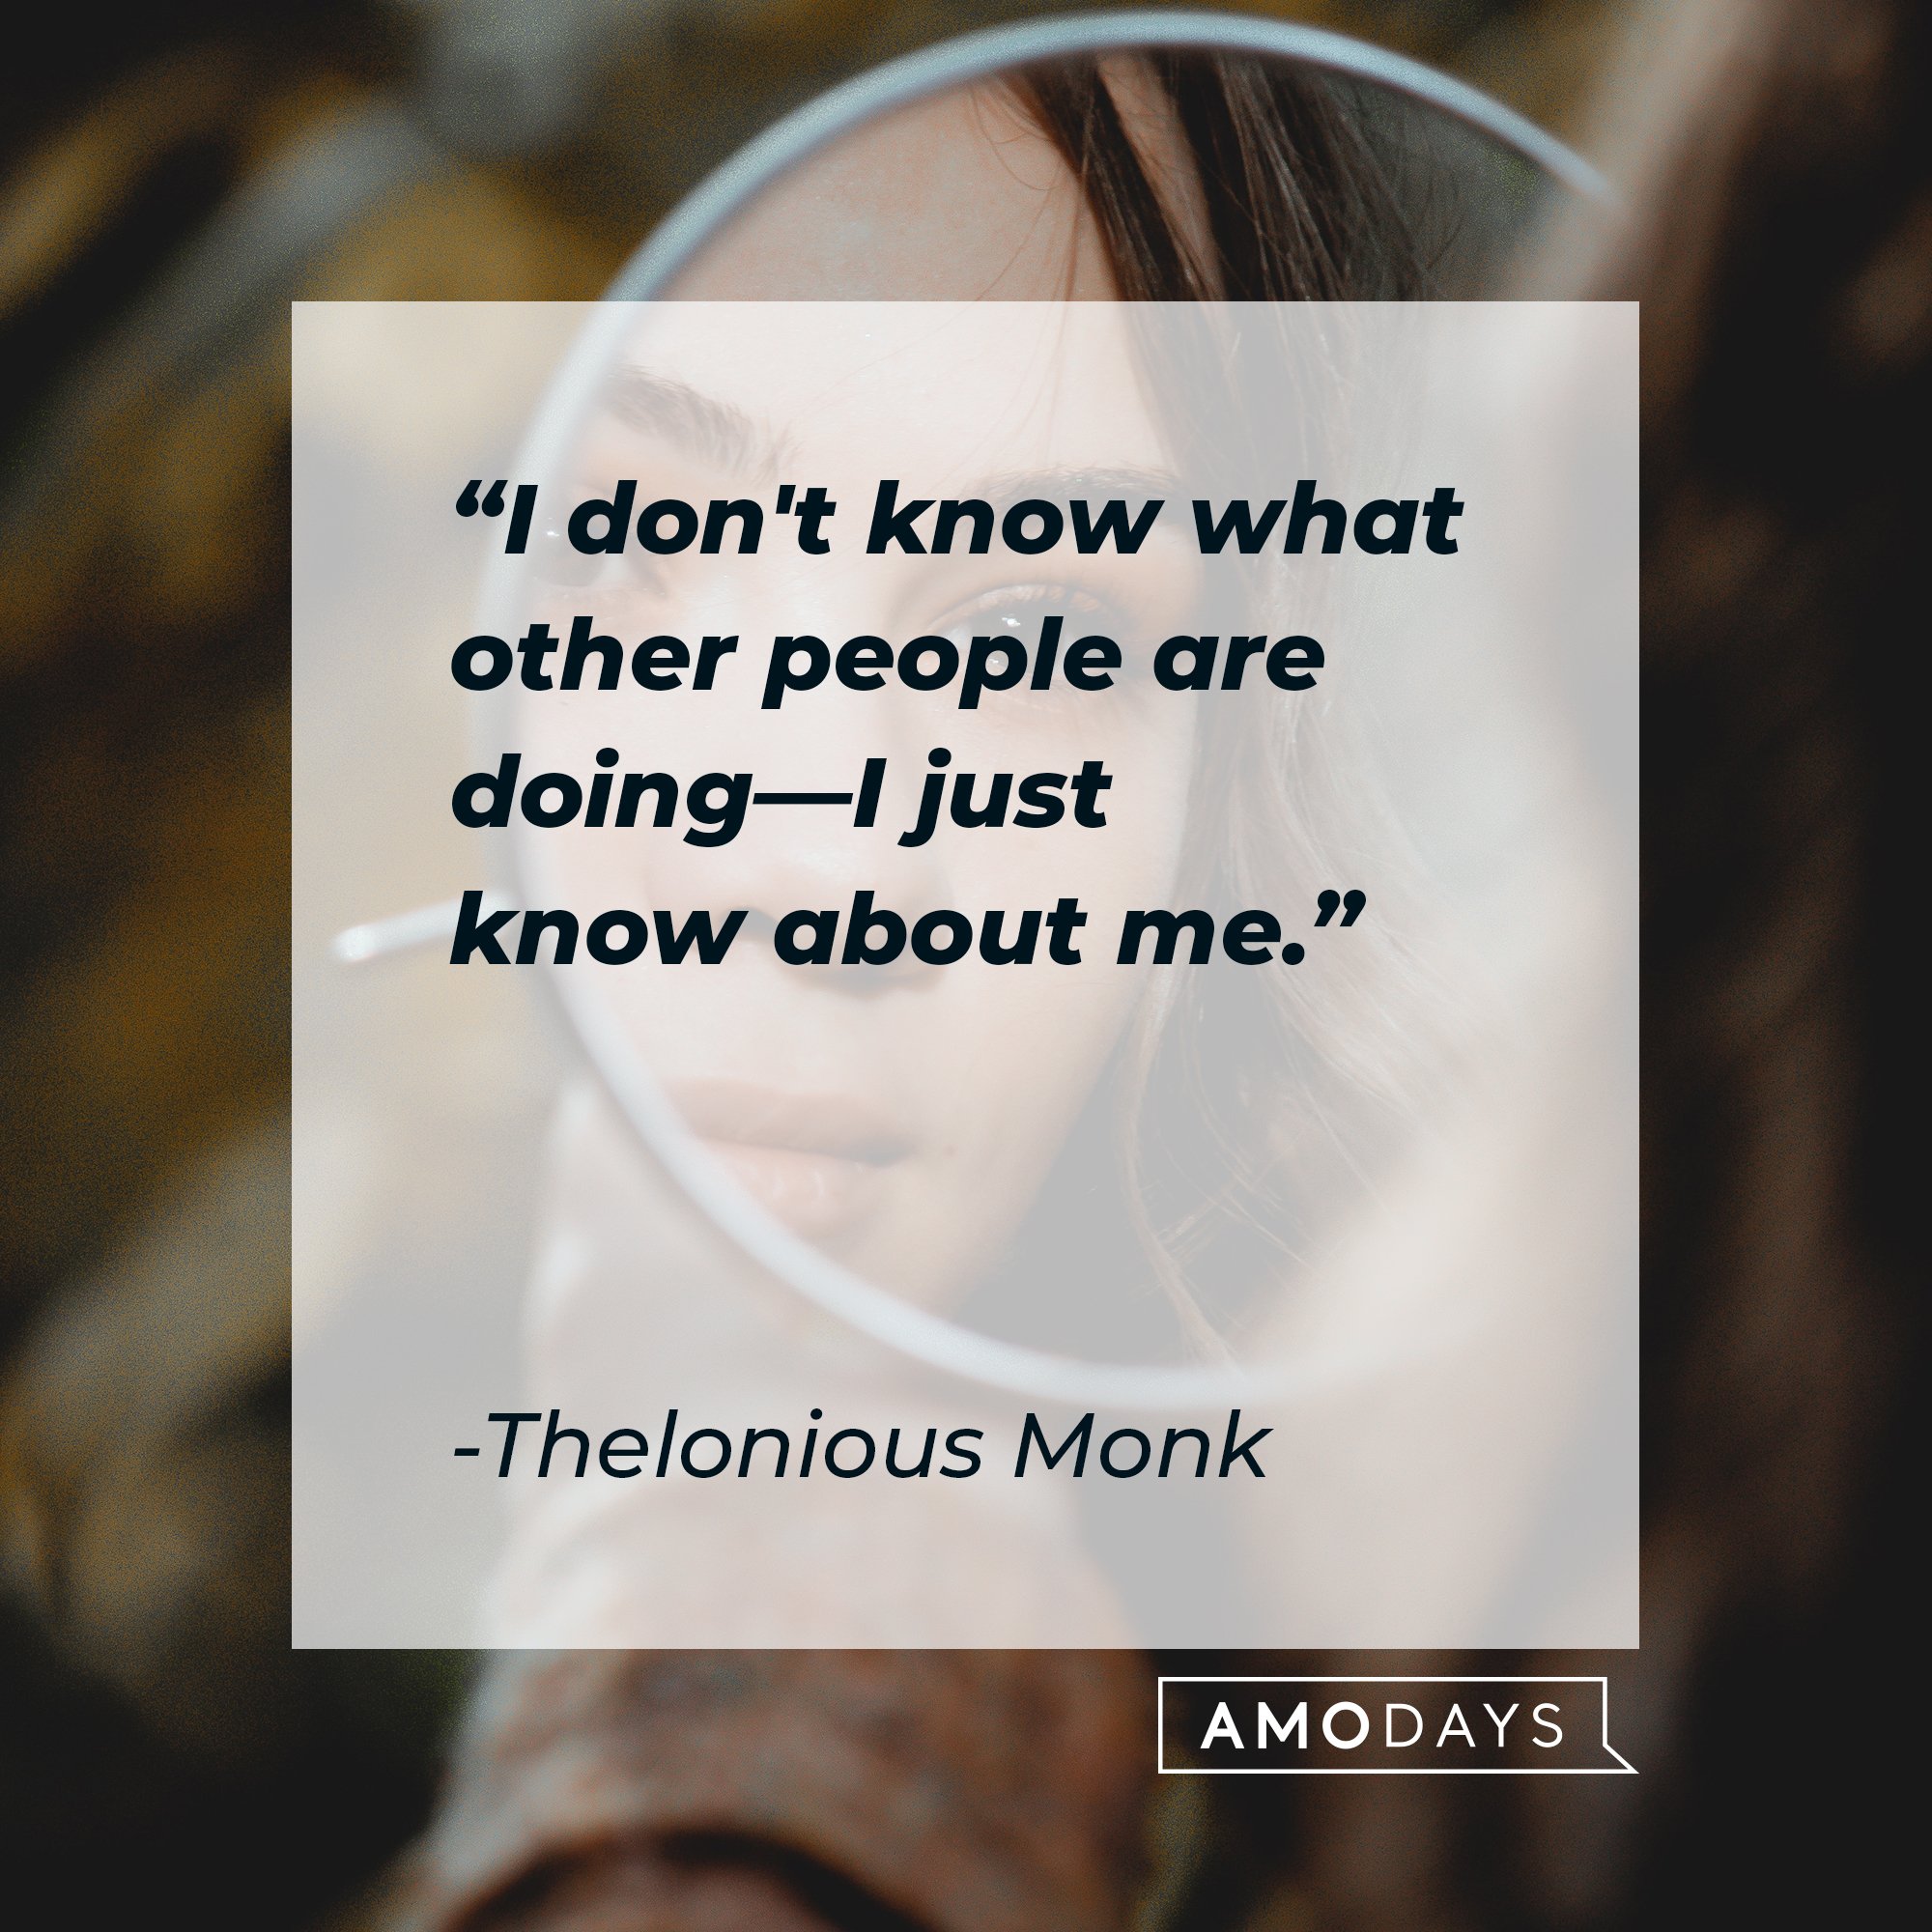 Thelonious Monk’s quote: "I don't know what other people are doing—I just know about me." | Image: AmoDays